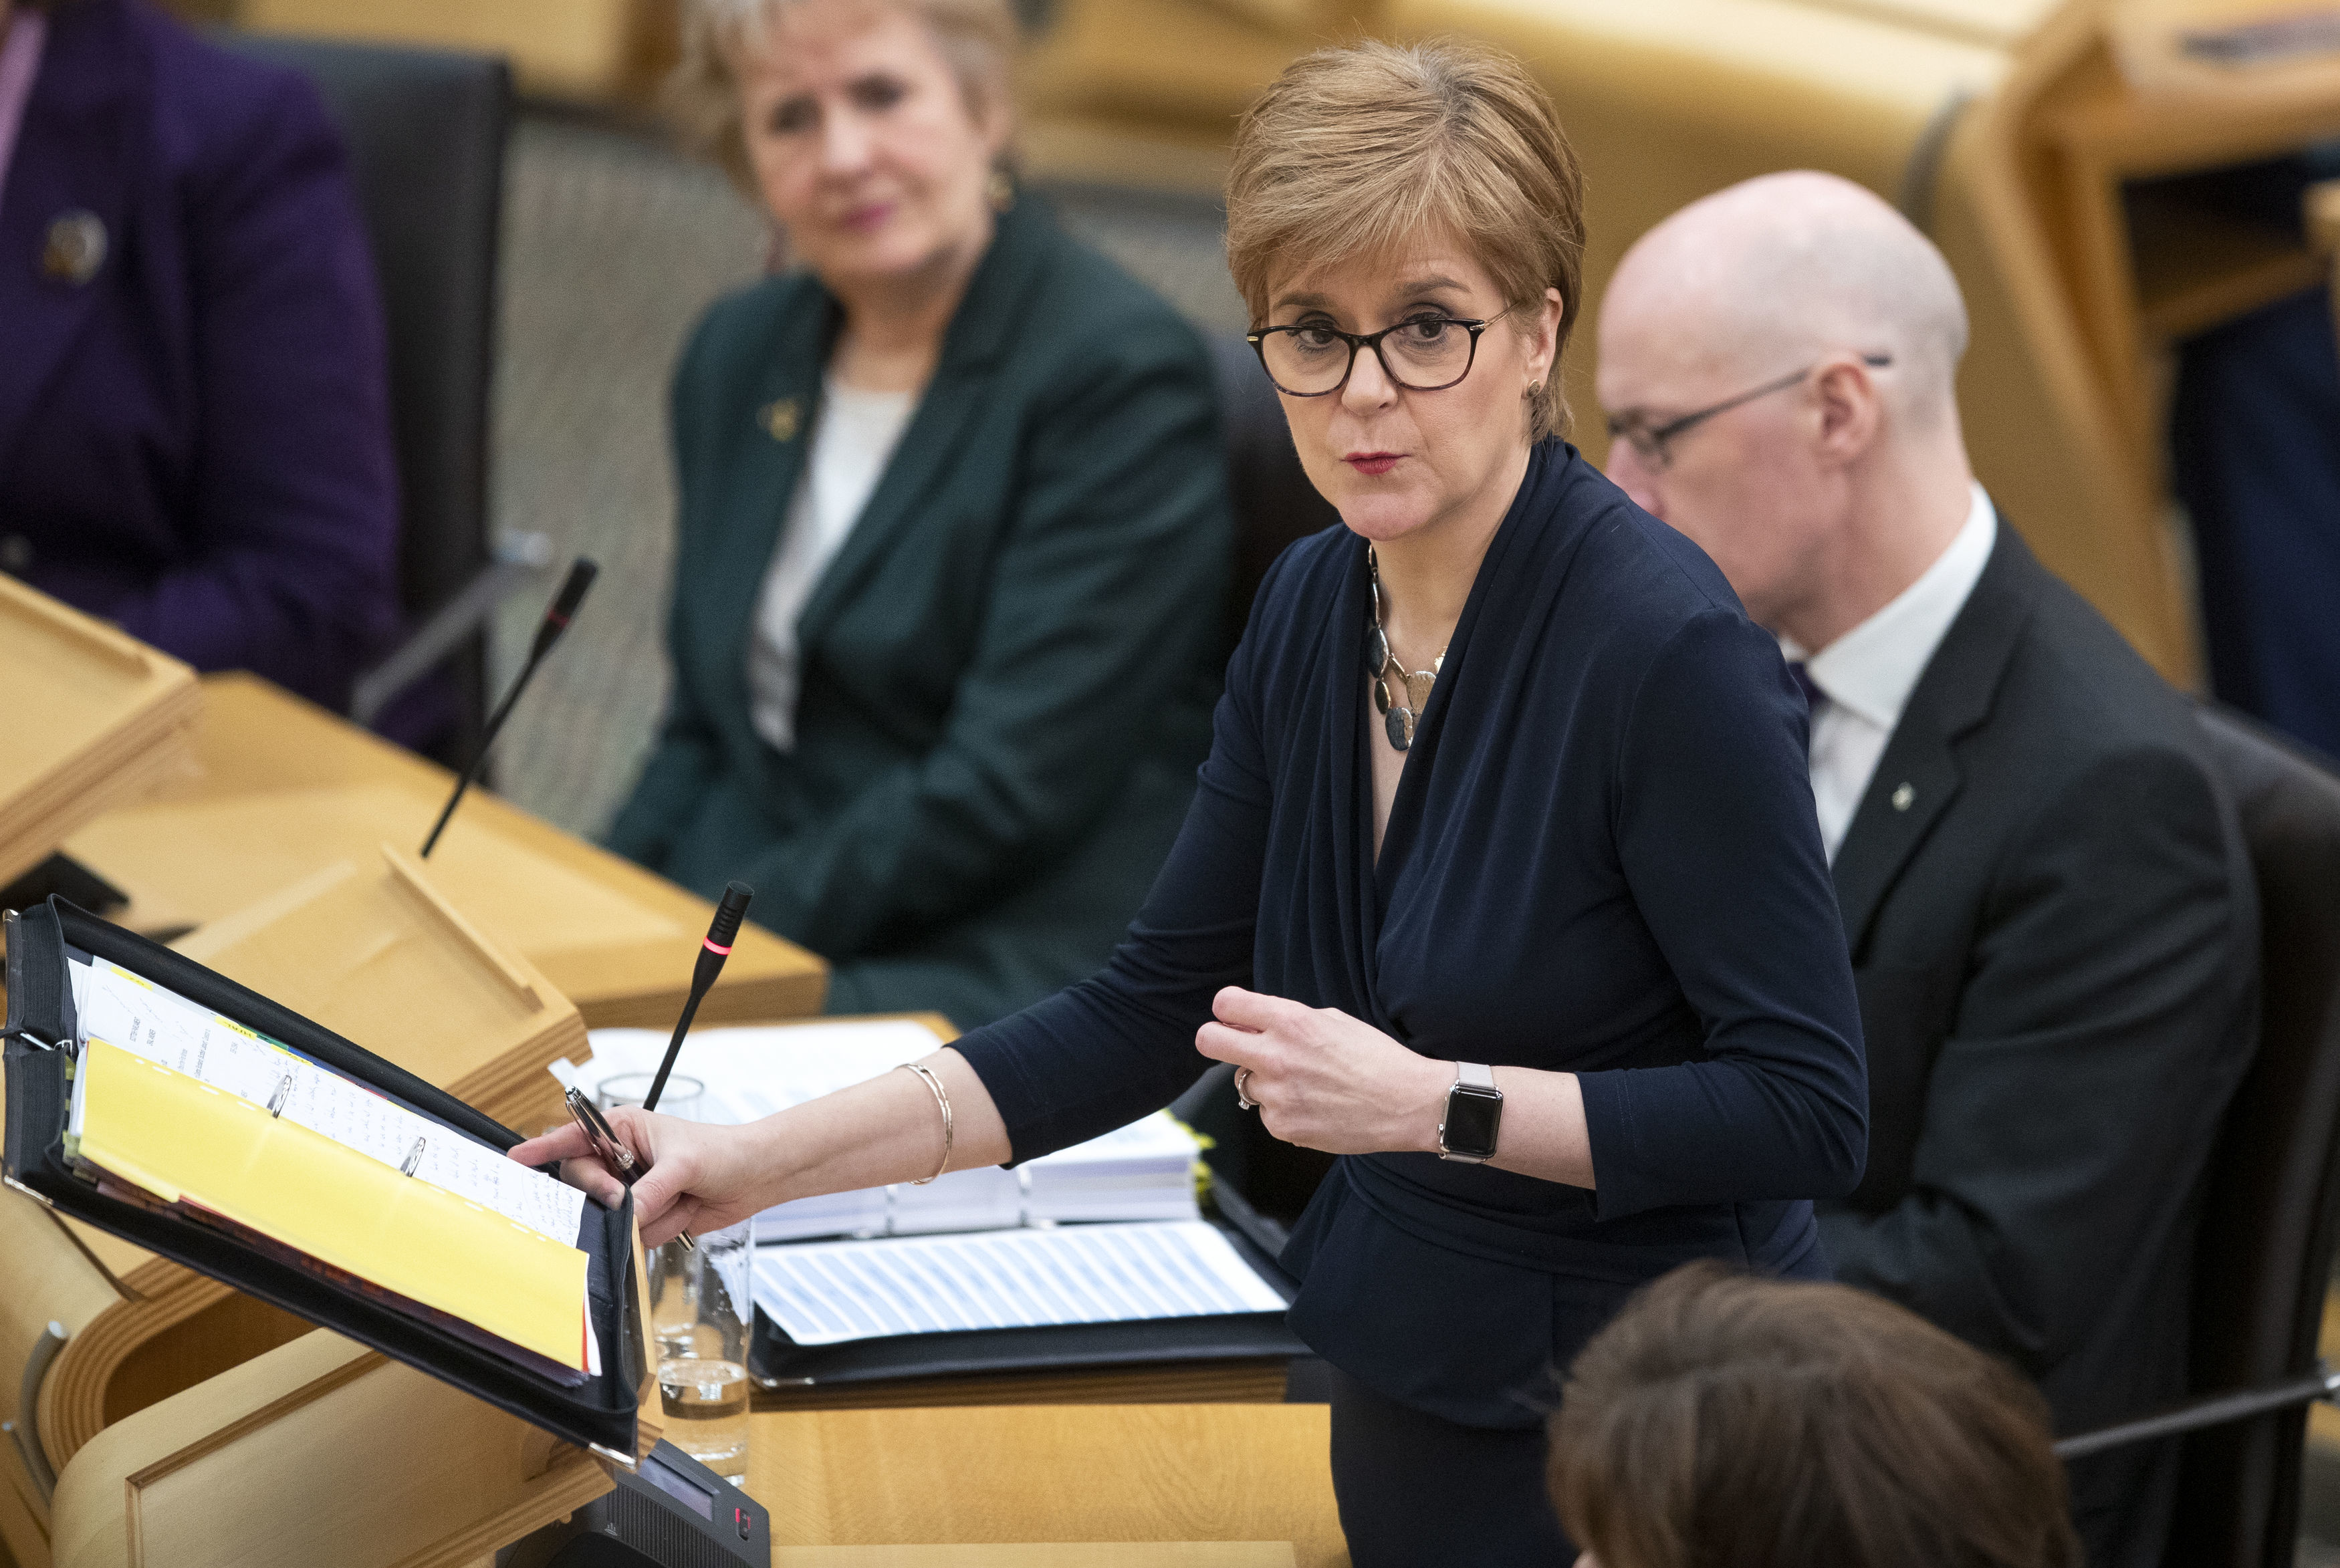 First Minister Nicola Sturgeon during First Minister's Questions at the Scottish Parliament in Edinburgh.